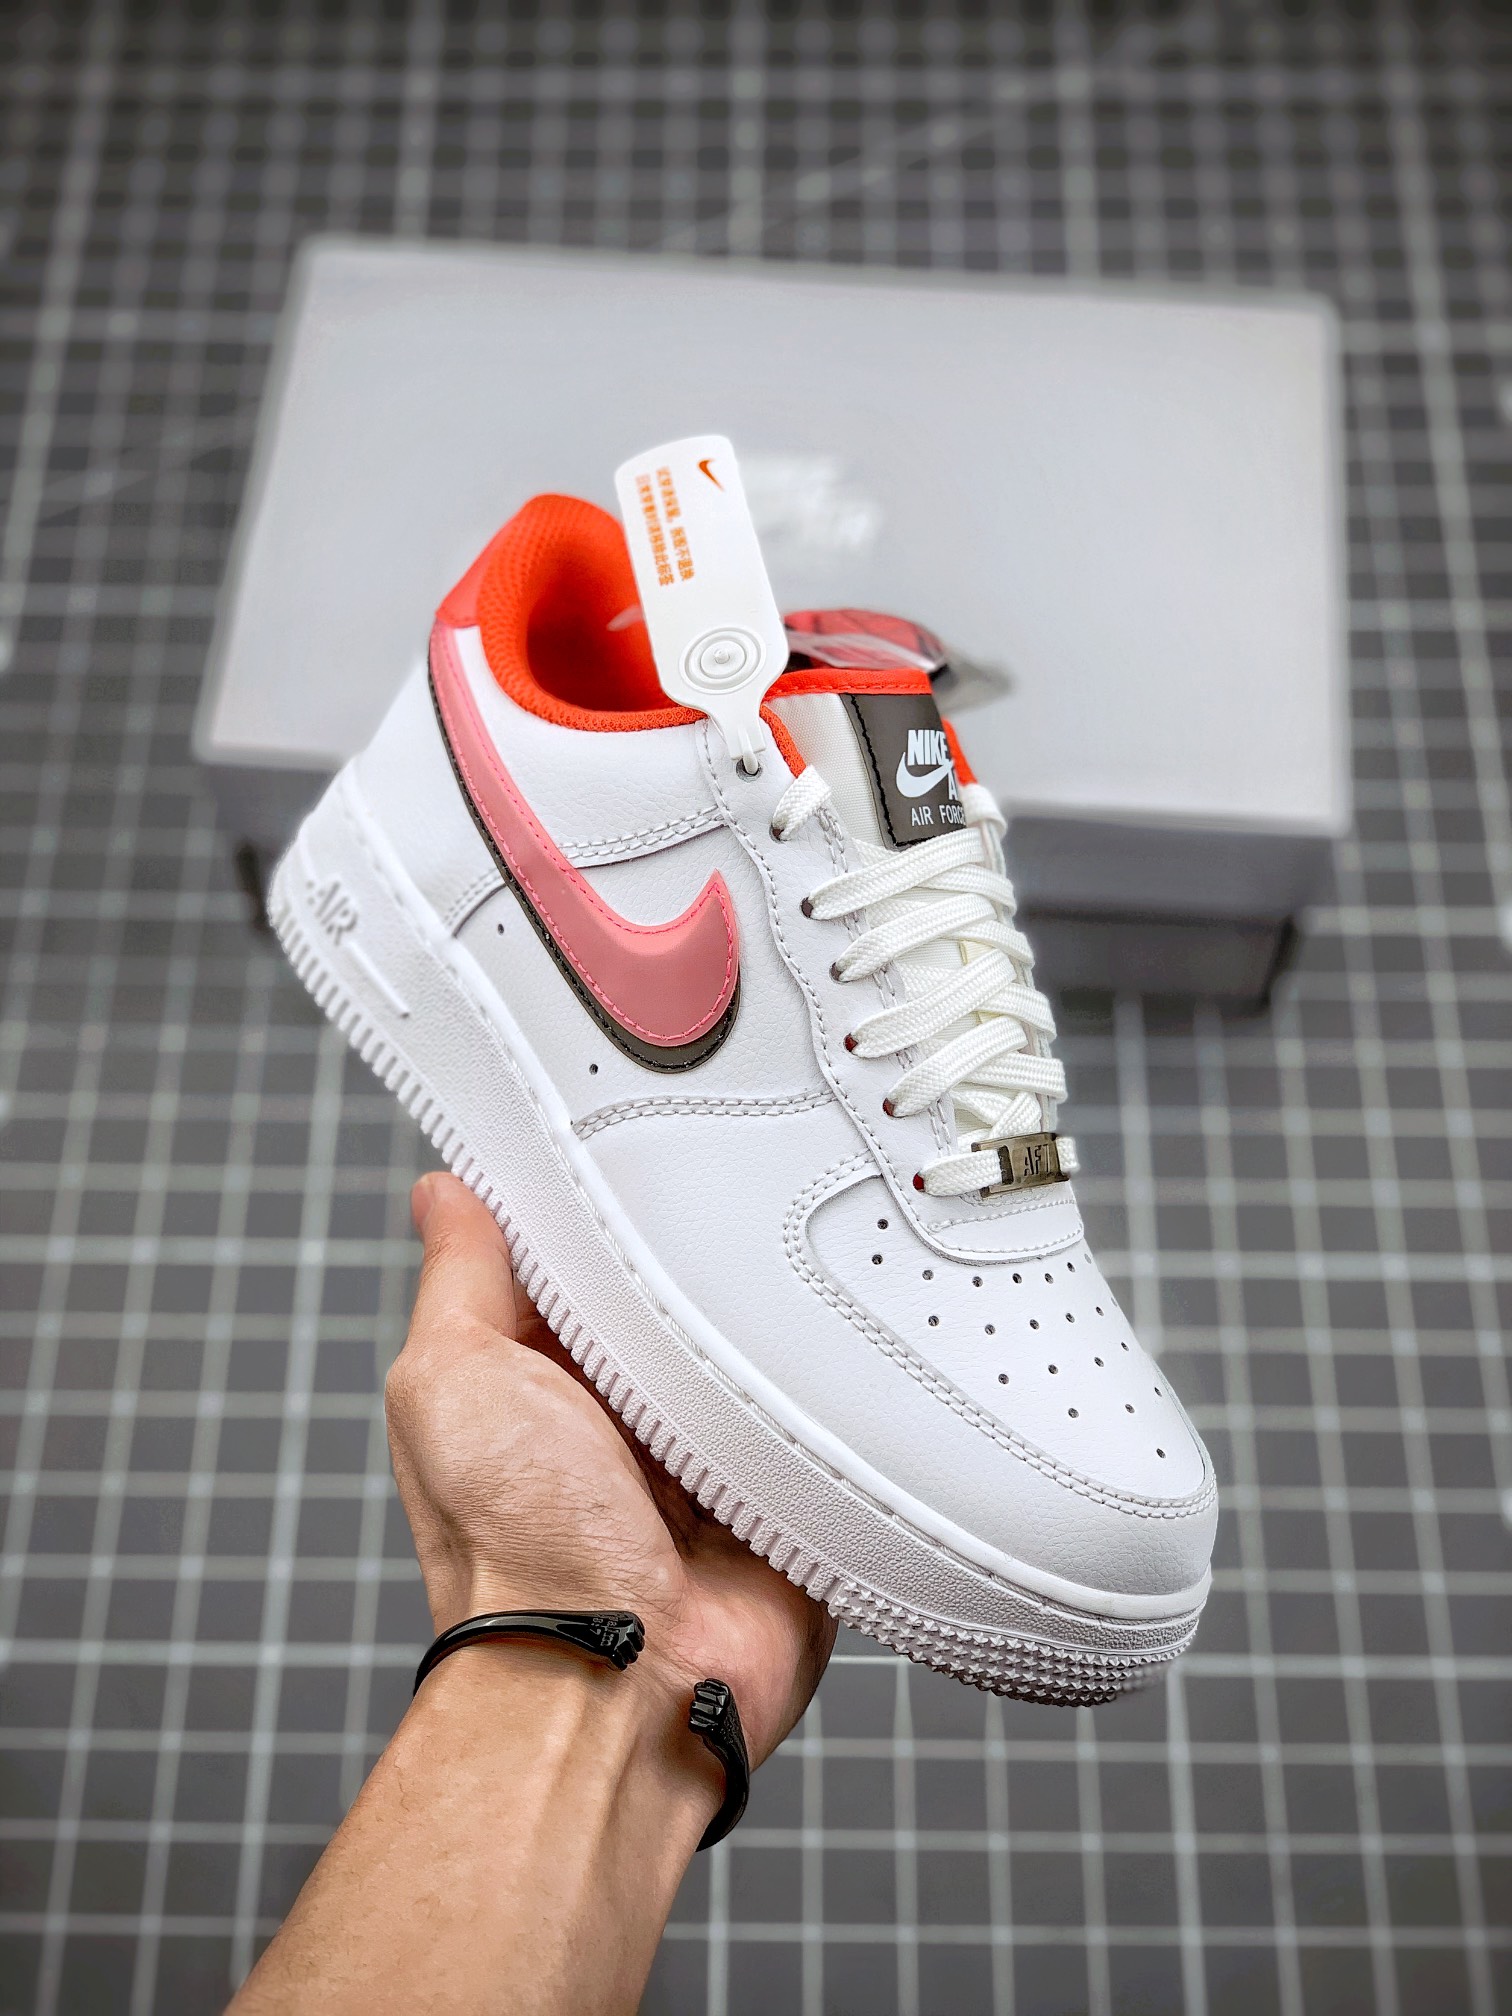 Nike Air AF Force 1 Low White/Black/Bright Crimson Shoes